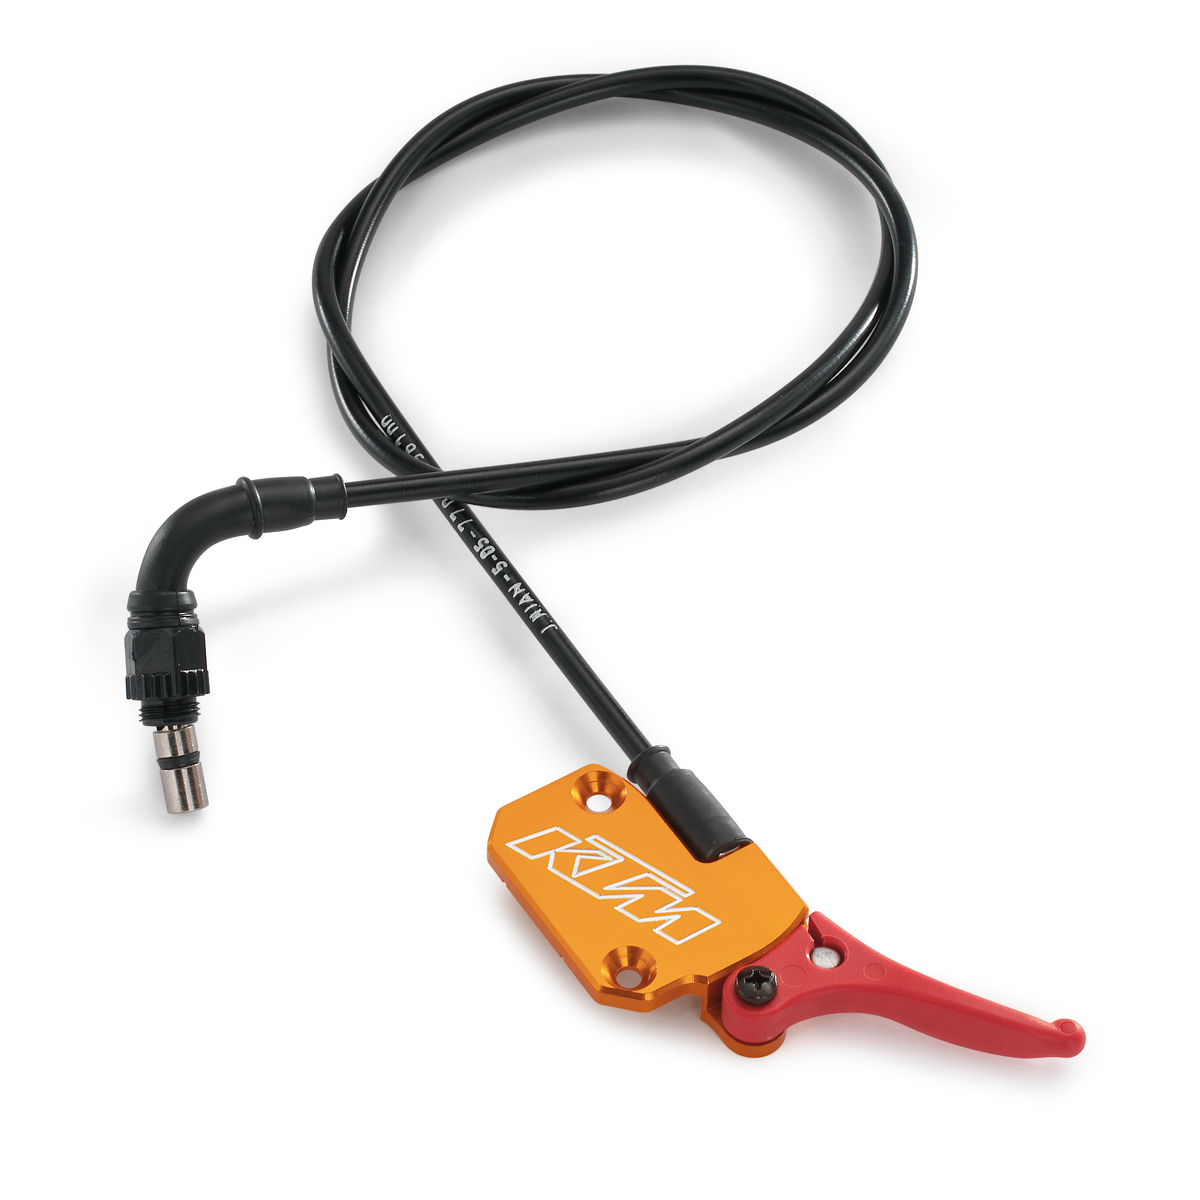 Hot-start control cable